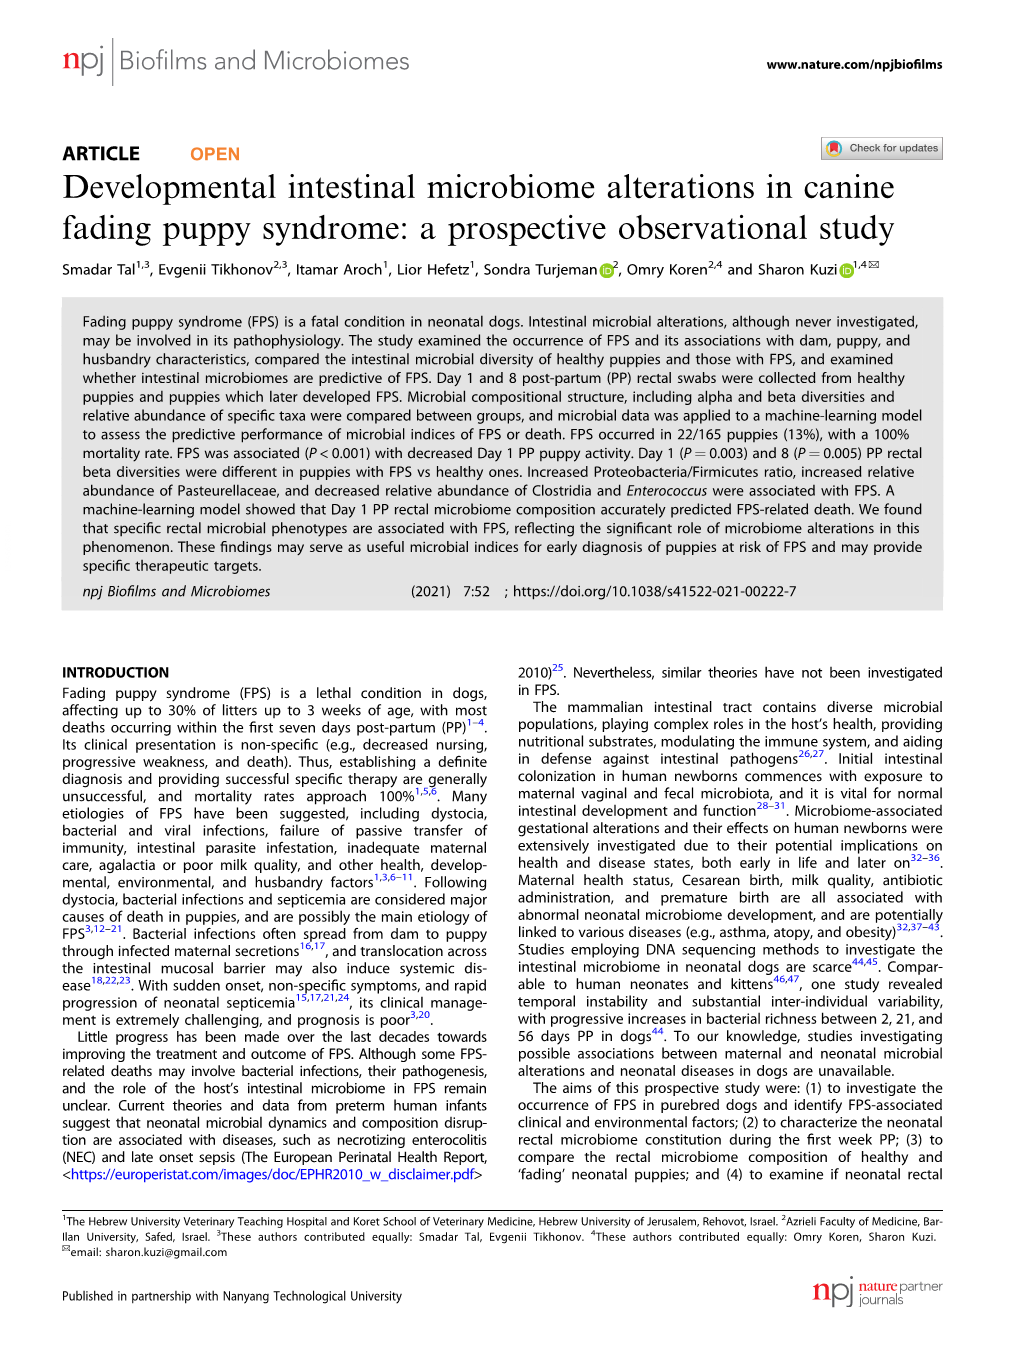 Developmental Intestinal Microbiome Alterations in Canine Fading Puppy Syndrome